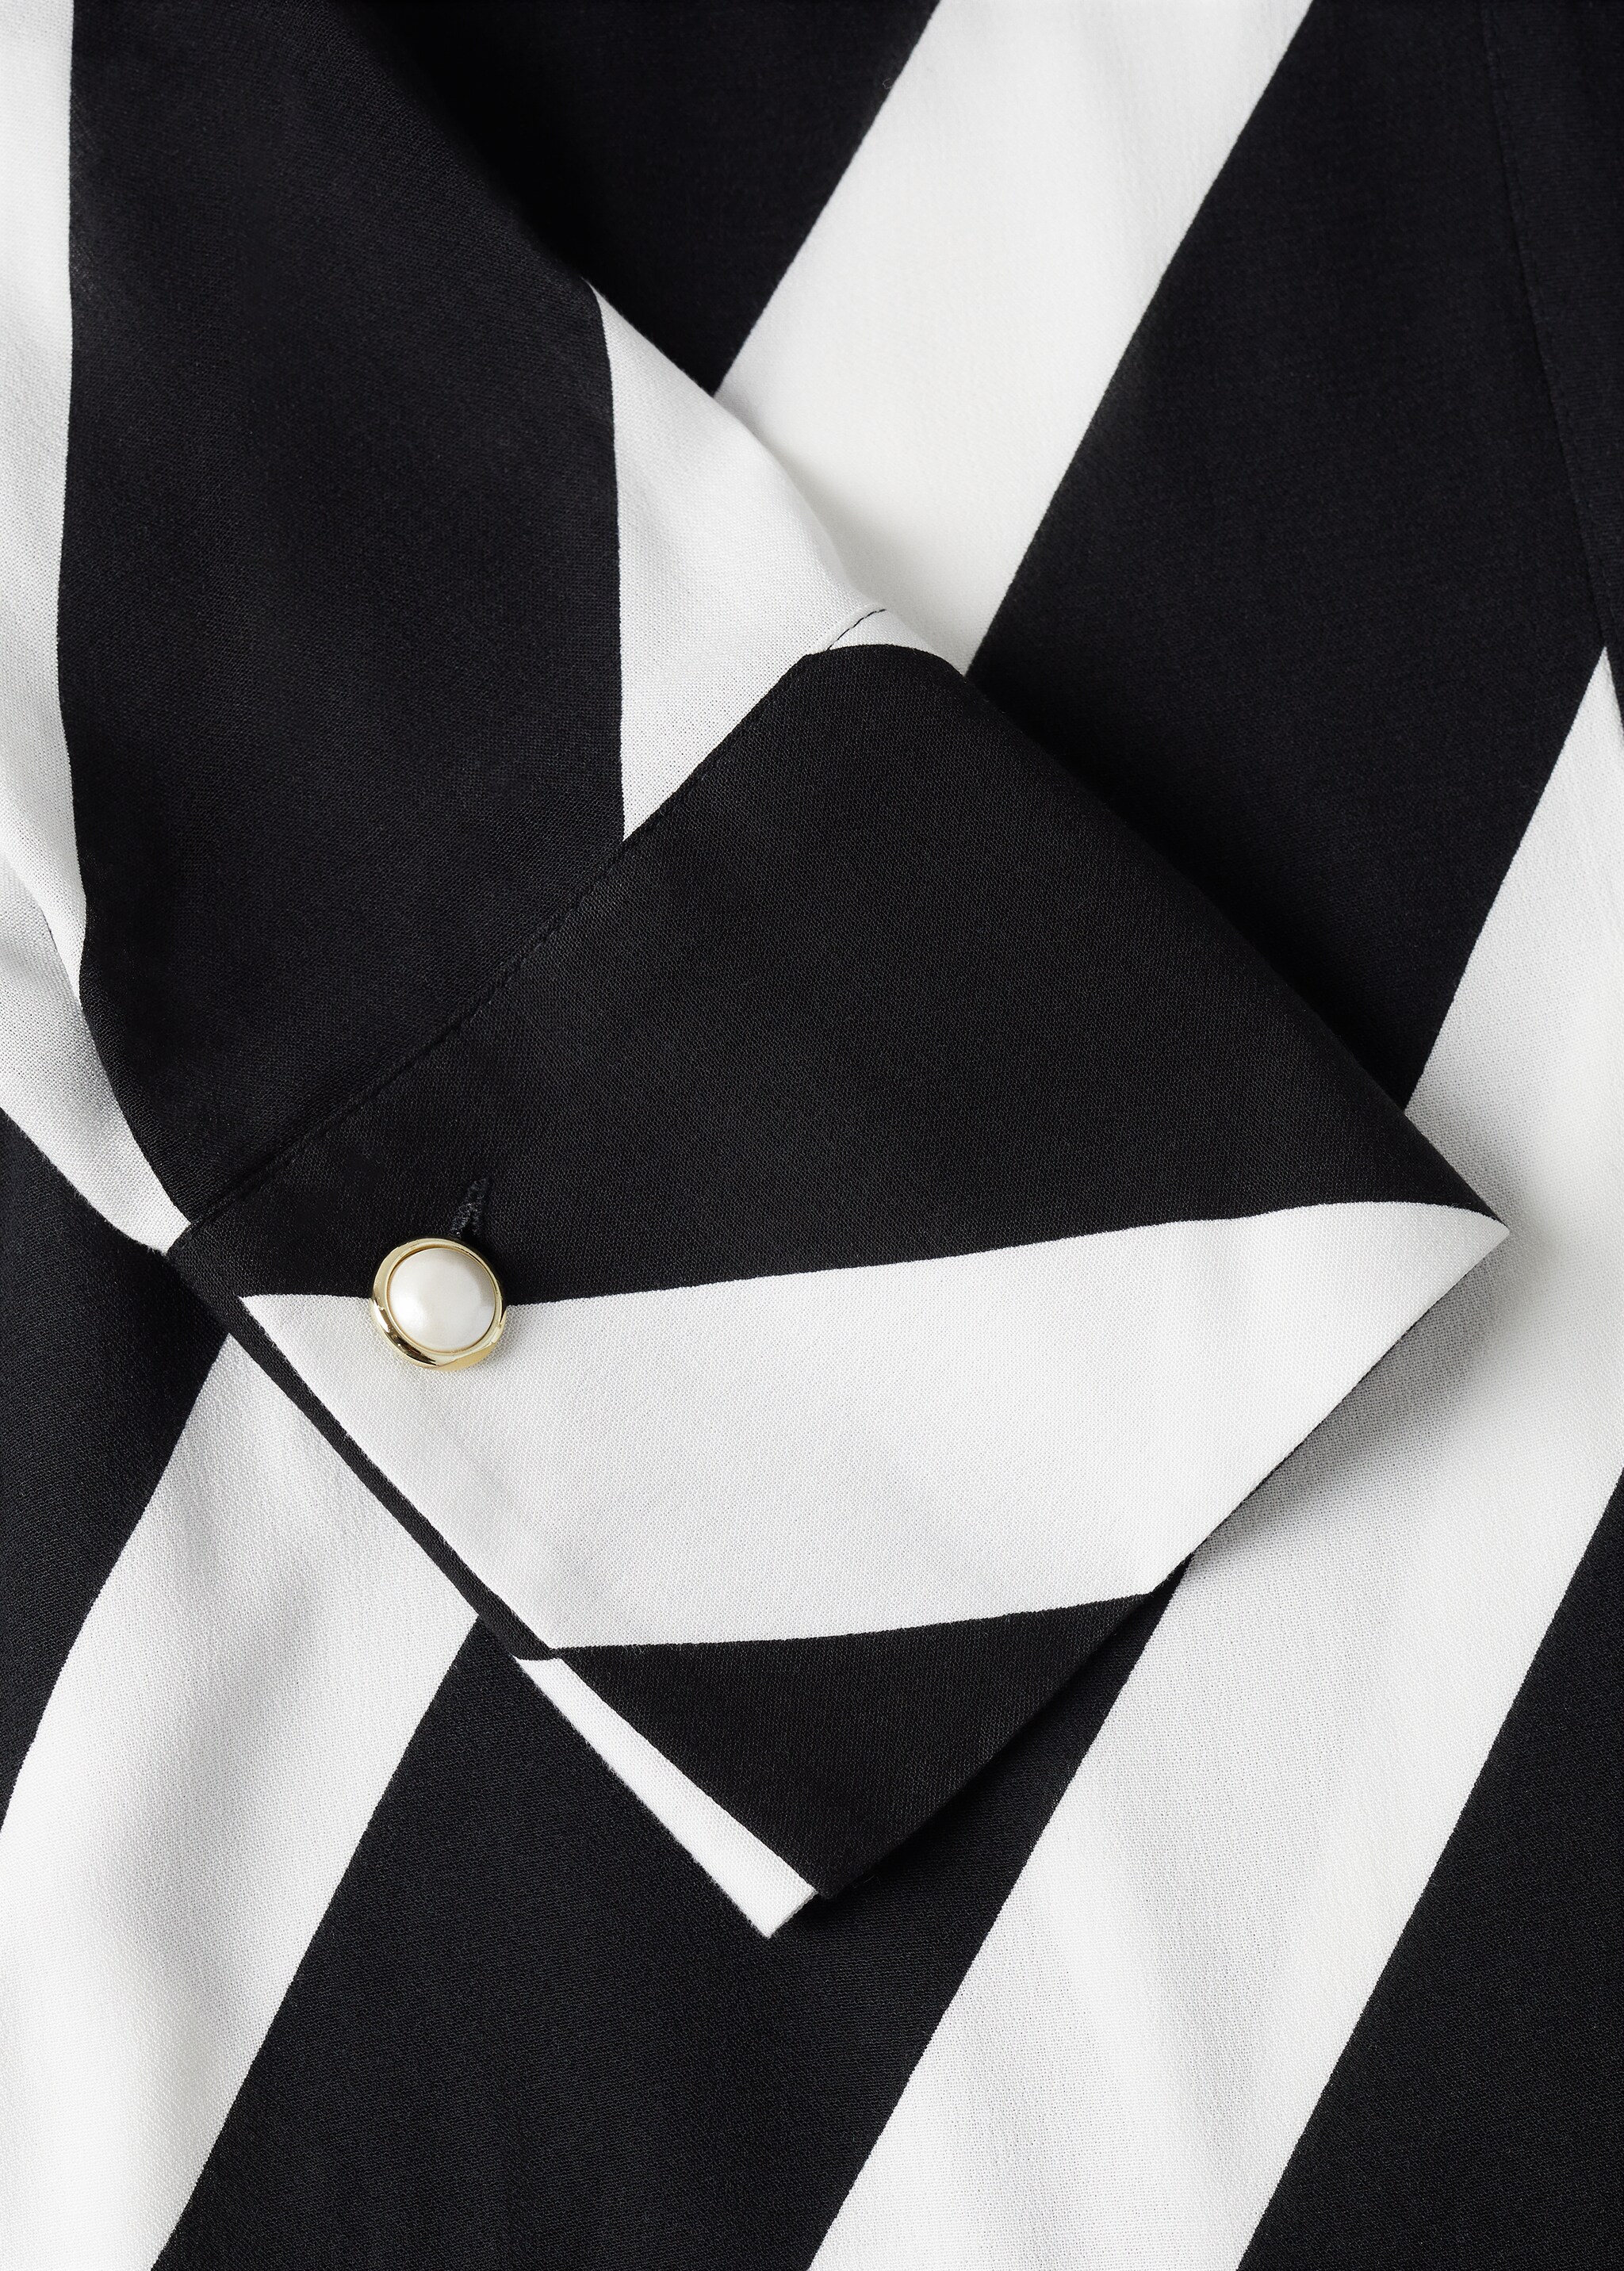 Striped wrap dress - Details of the article 8